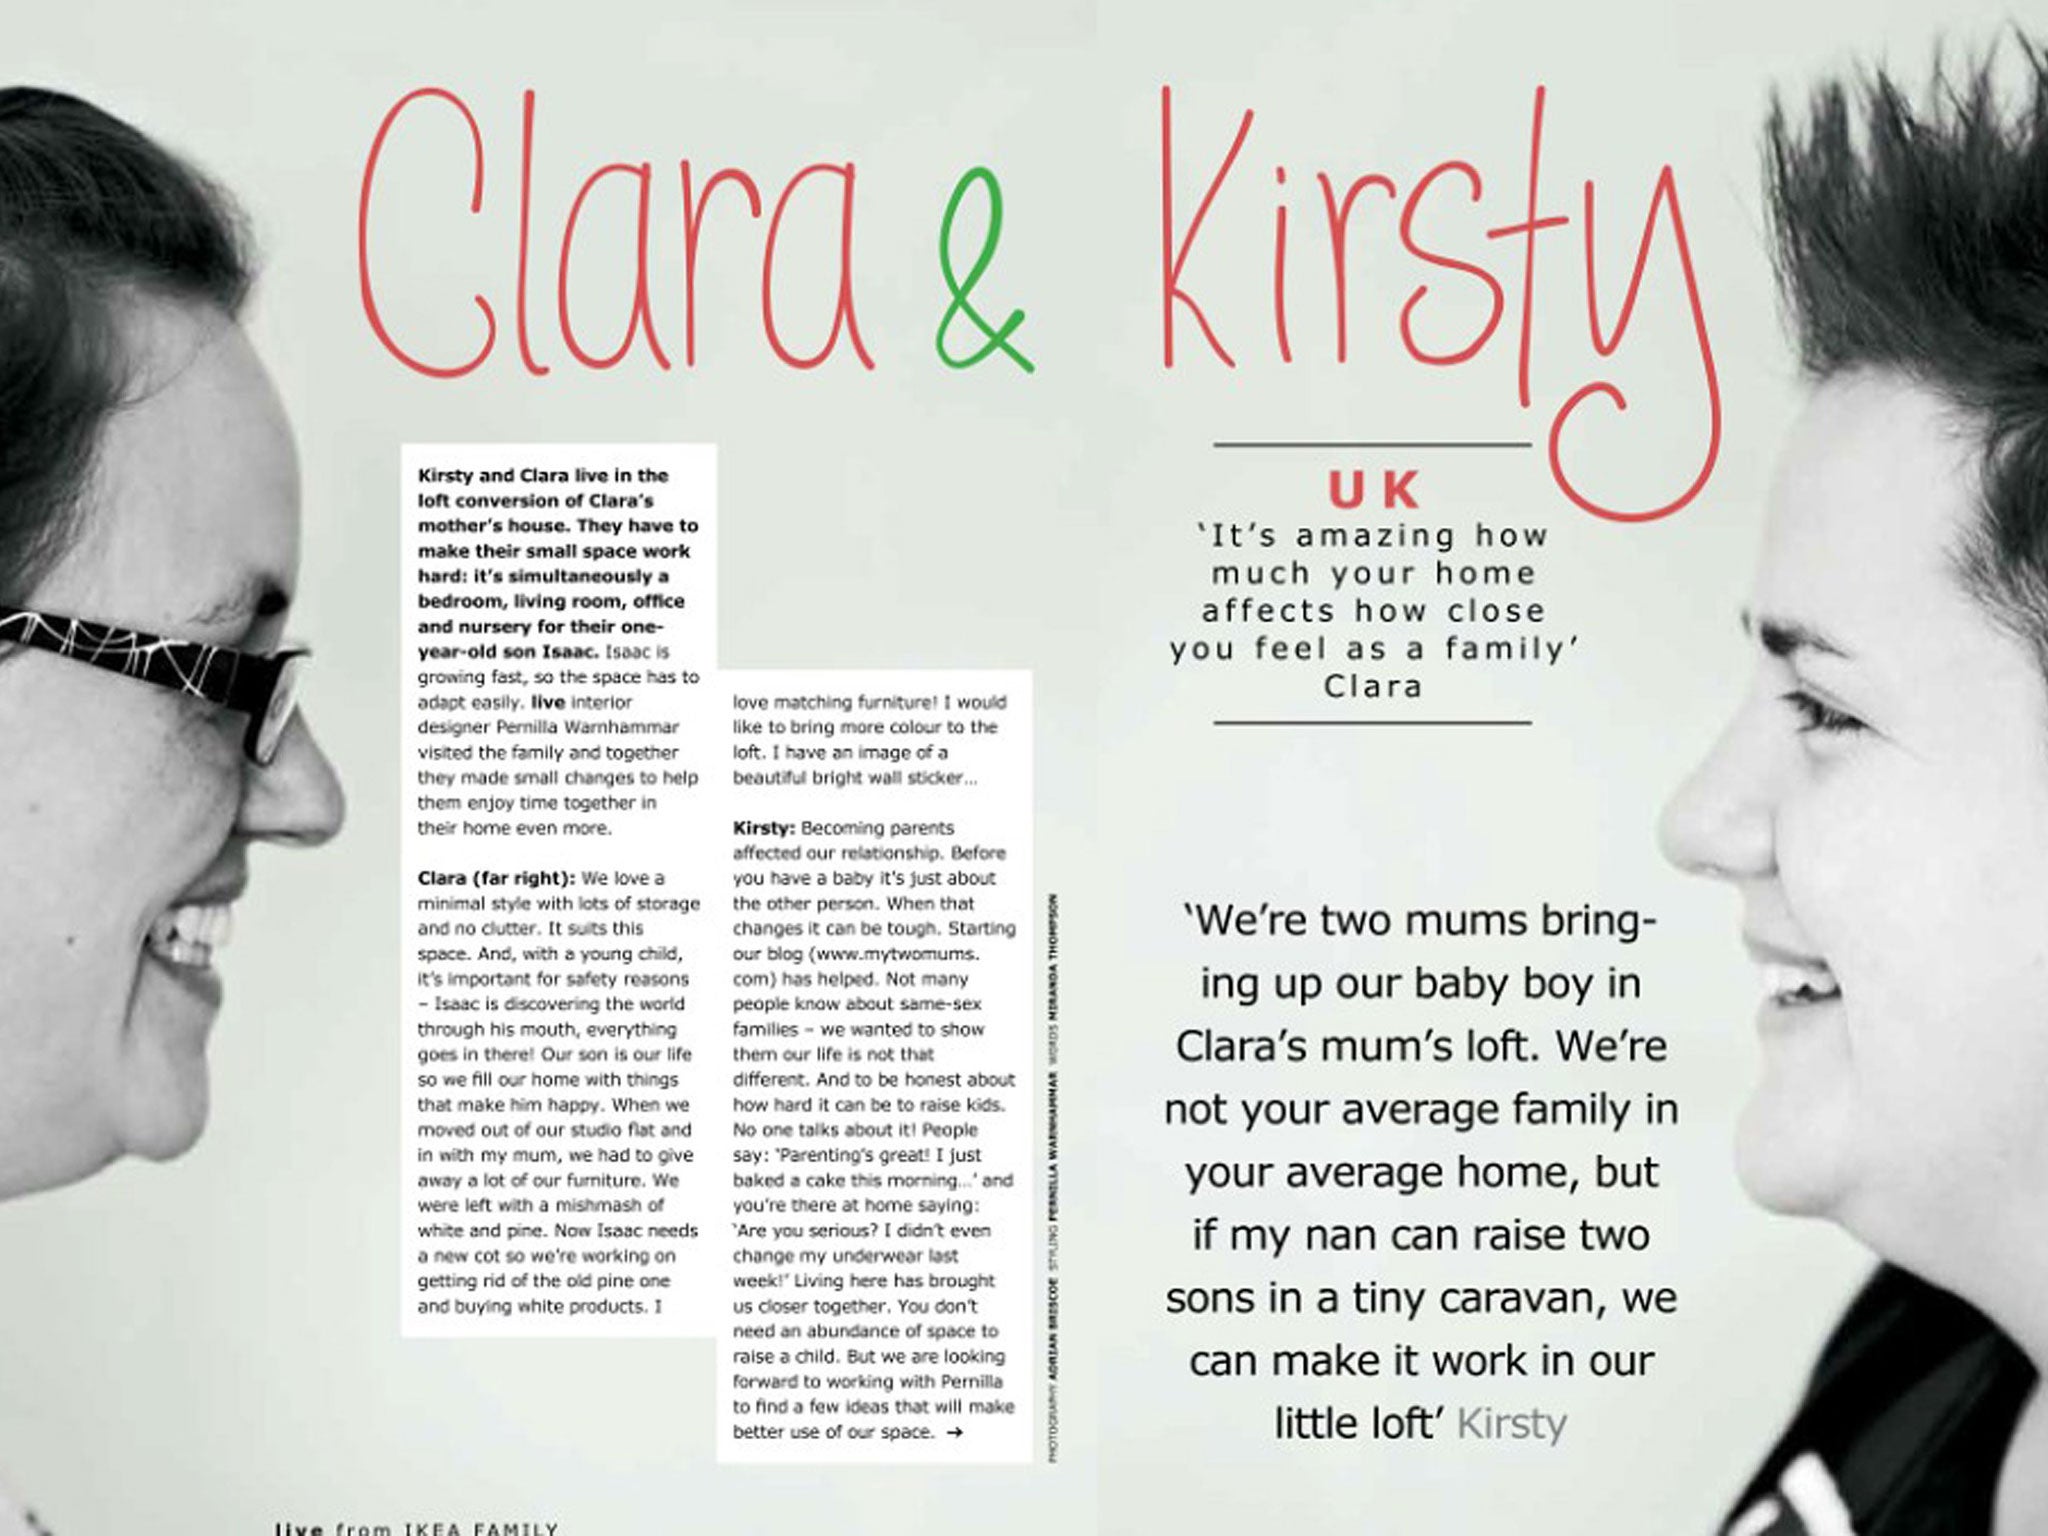 Ikea removed the above article about Clara and Kirsty, a lesbian couple from Dorset, from the Russian edition of its monthly magazine